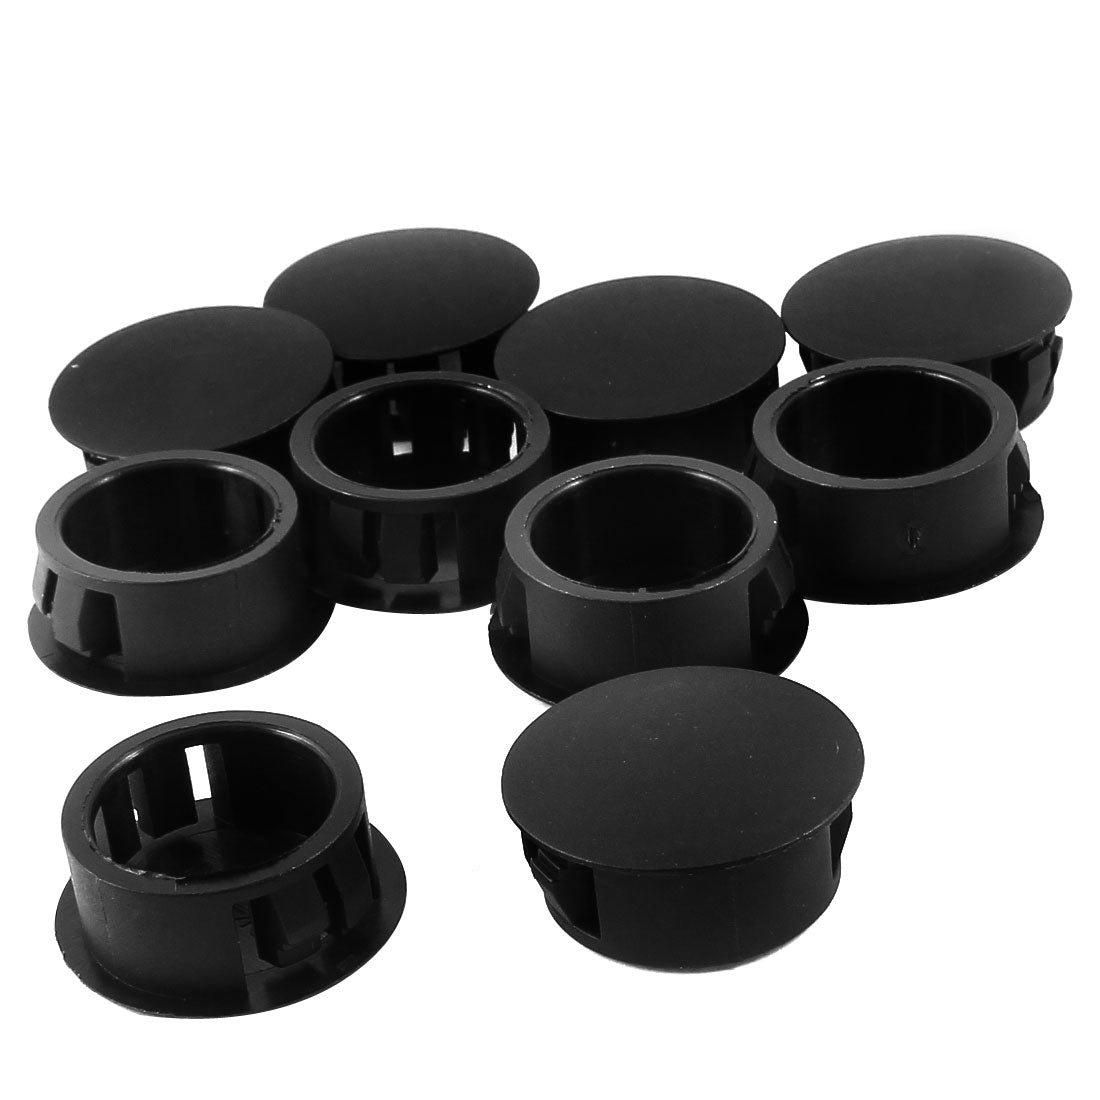 uxcell Uxcell 10pcs Black Plastic 20mm Diameter Snap in Type Locking Hole Button Cover 20mm x 24mm x 10mm